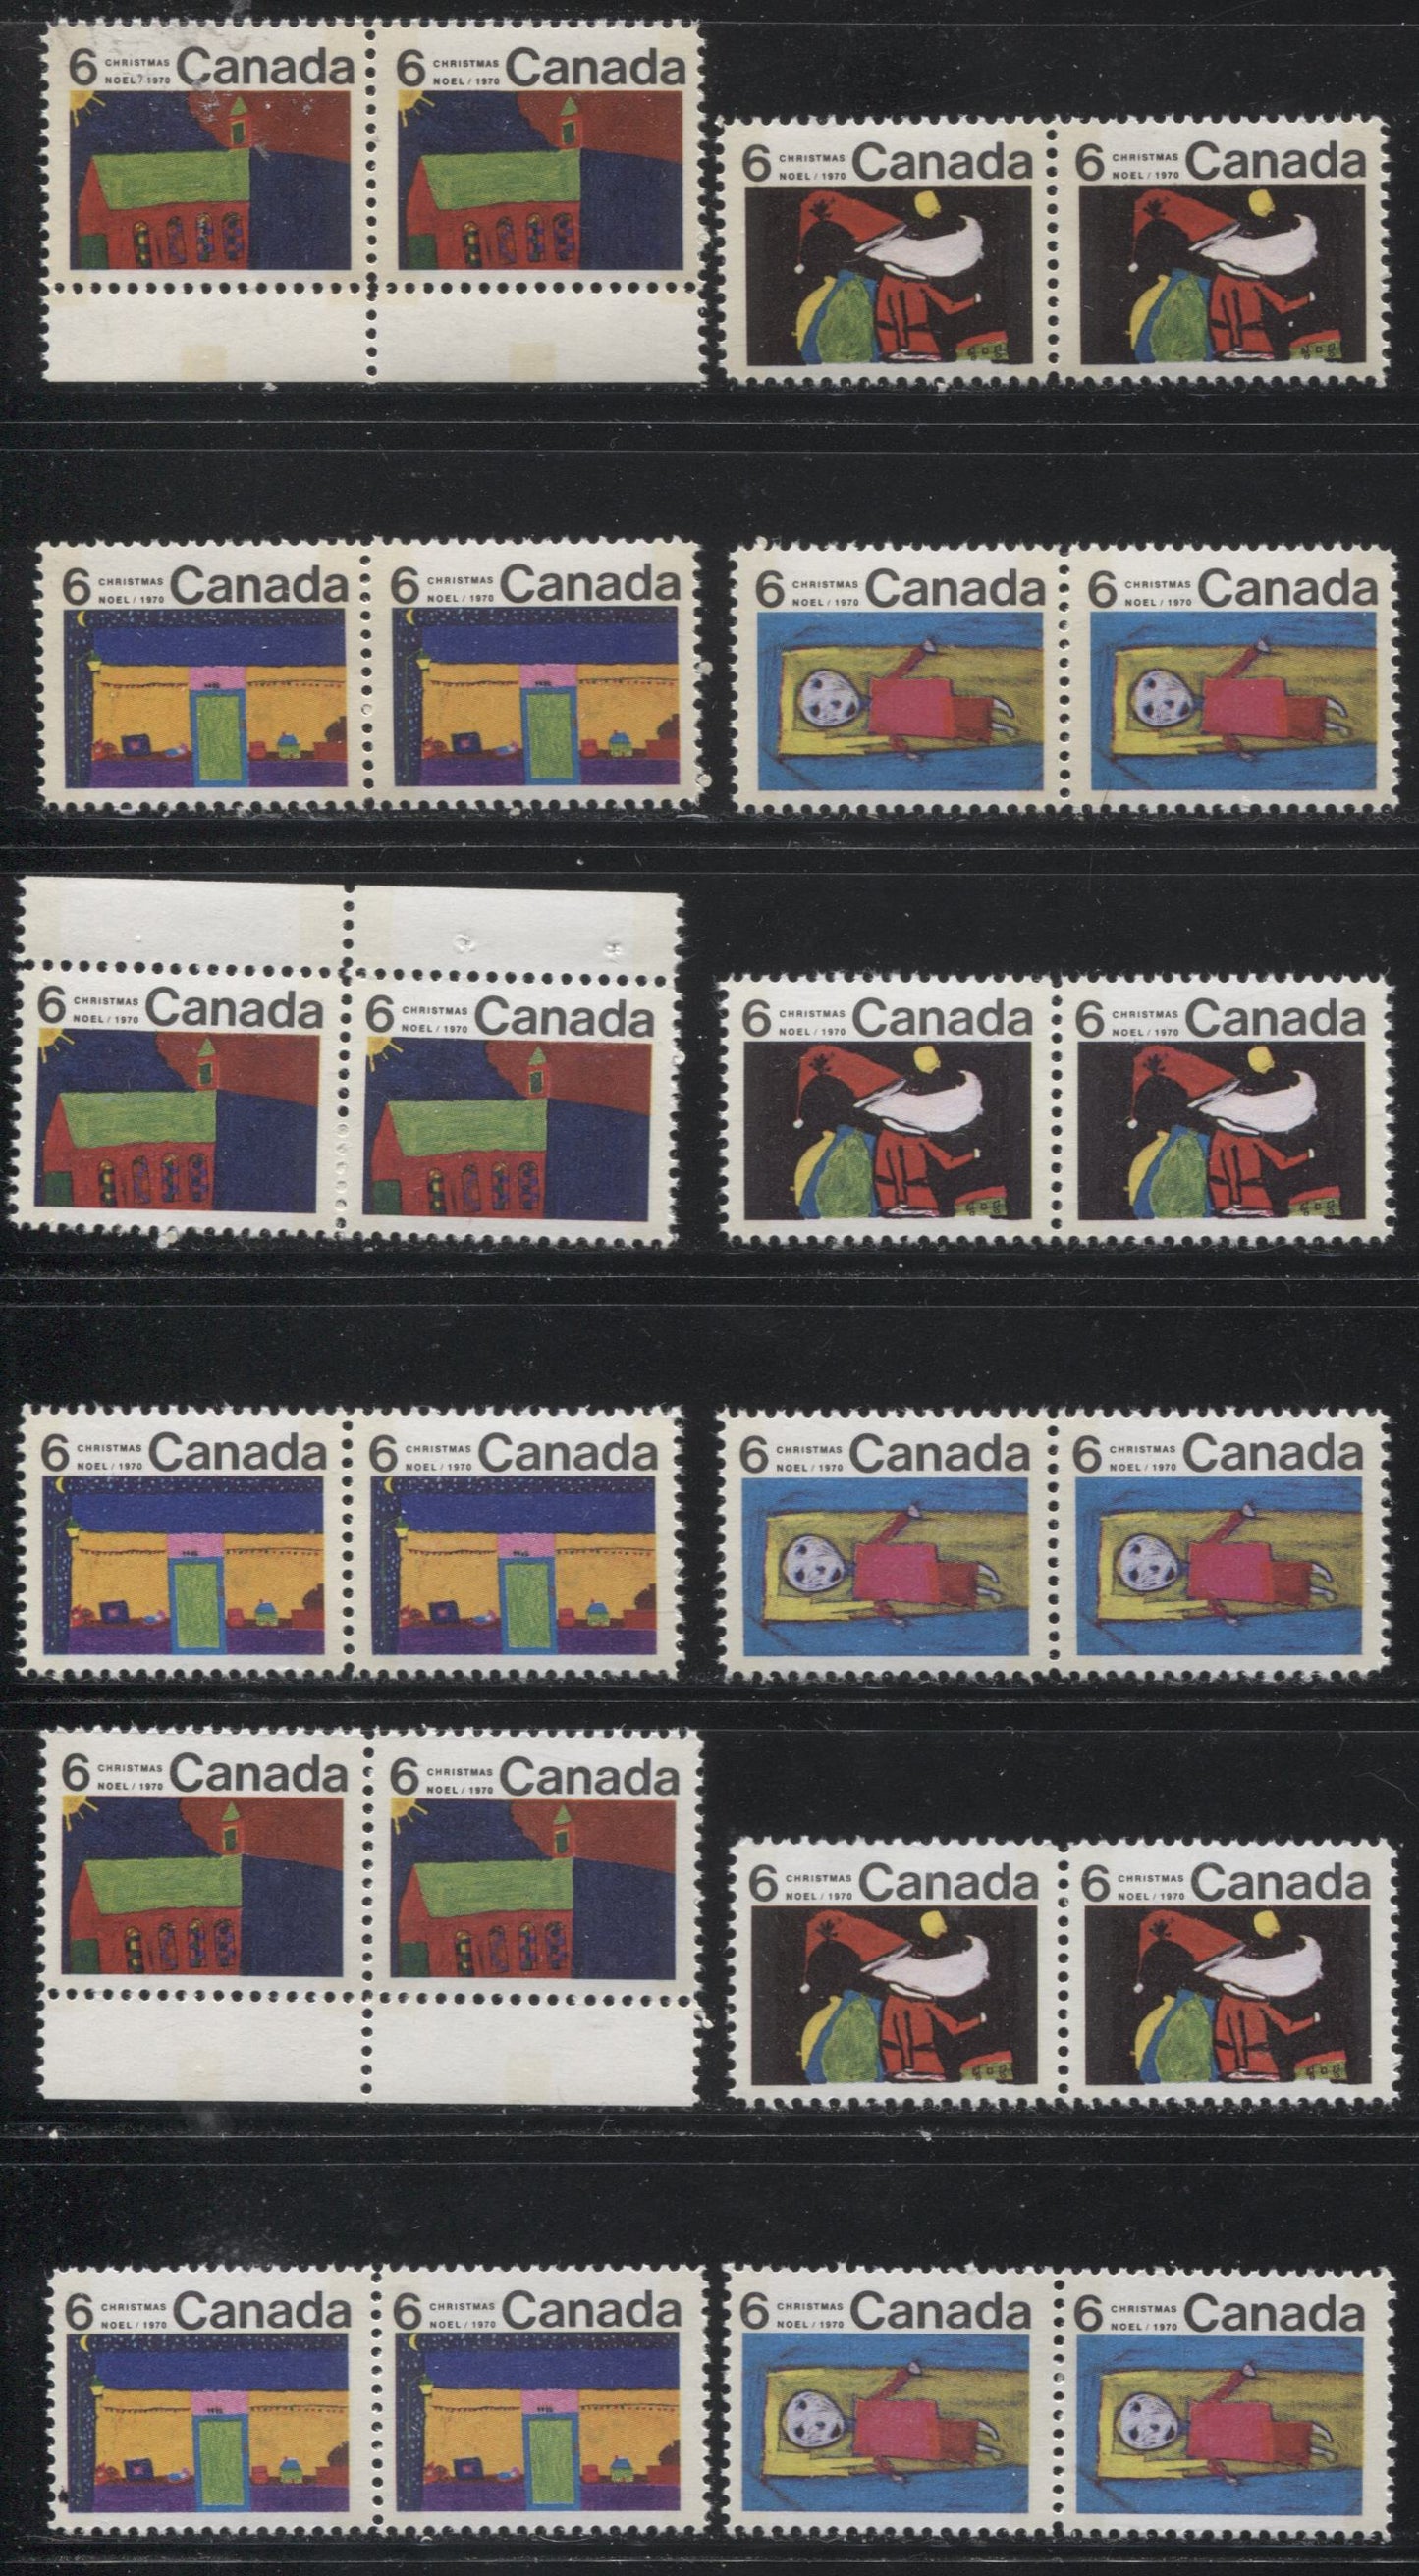 Lot 153 #524p/528p 6c Multicoloured 1970 Christmas Issue, A Specialized Lot of 12 Winnipeg Tagged Identical Horizontal Pairs From the Middle of the Sheet, Different HB Ribbed Papers, Perfs 11.95 x 11.9, and 11.9